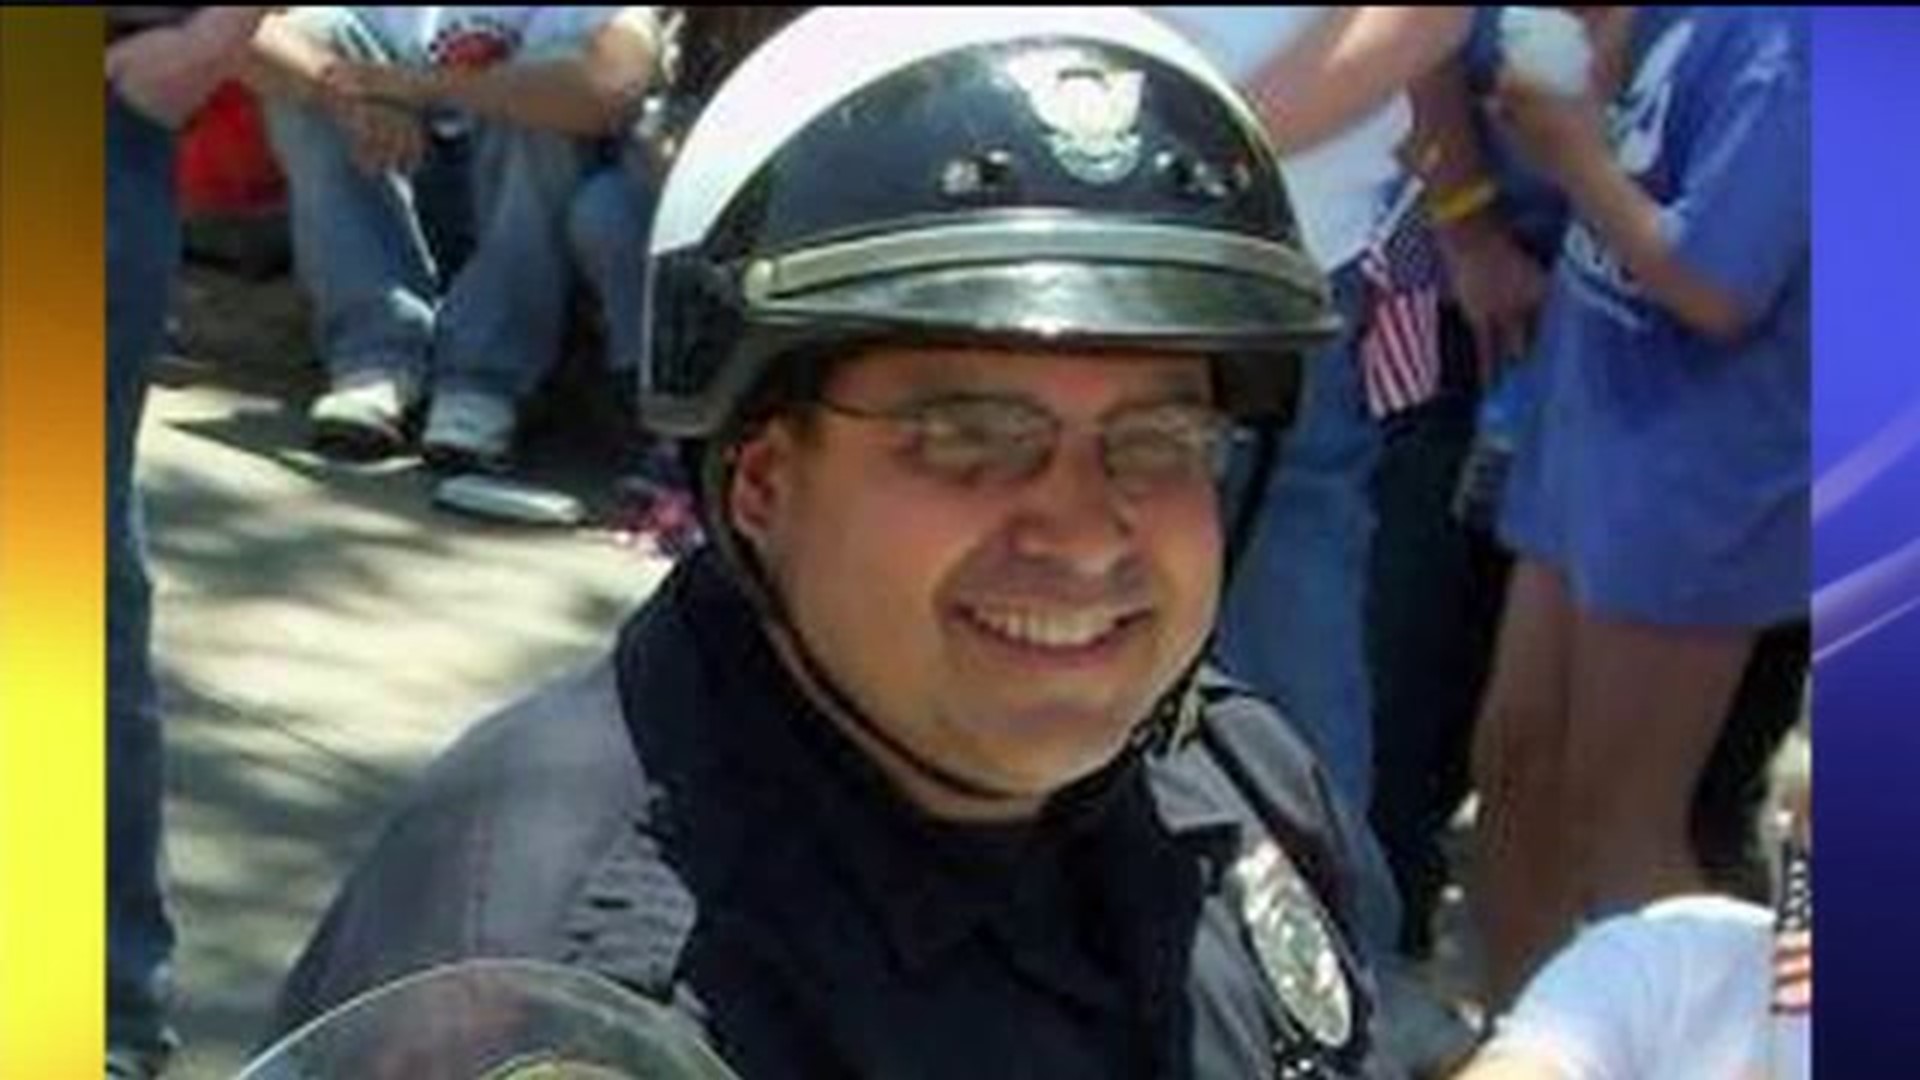 Police Officer, Father of 11 loses battle to Cancer